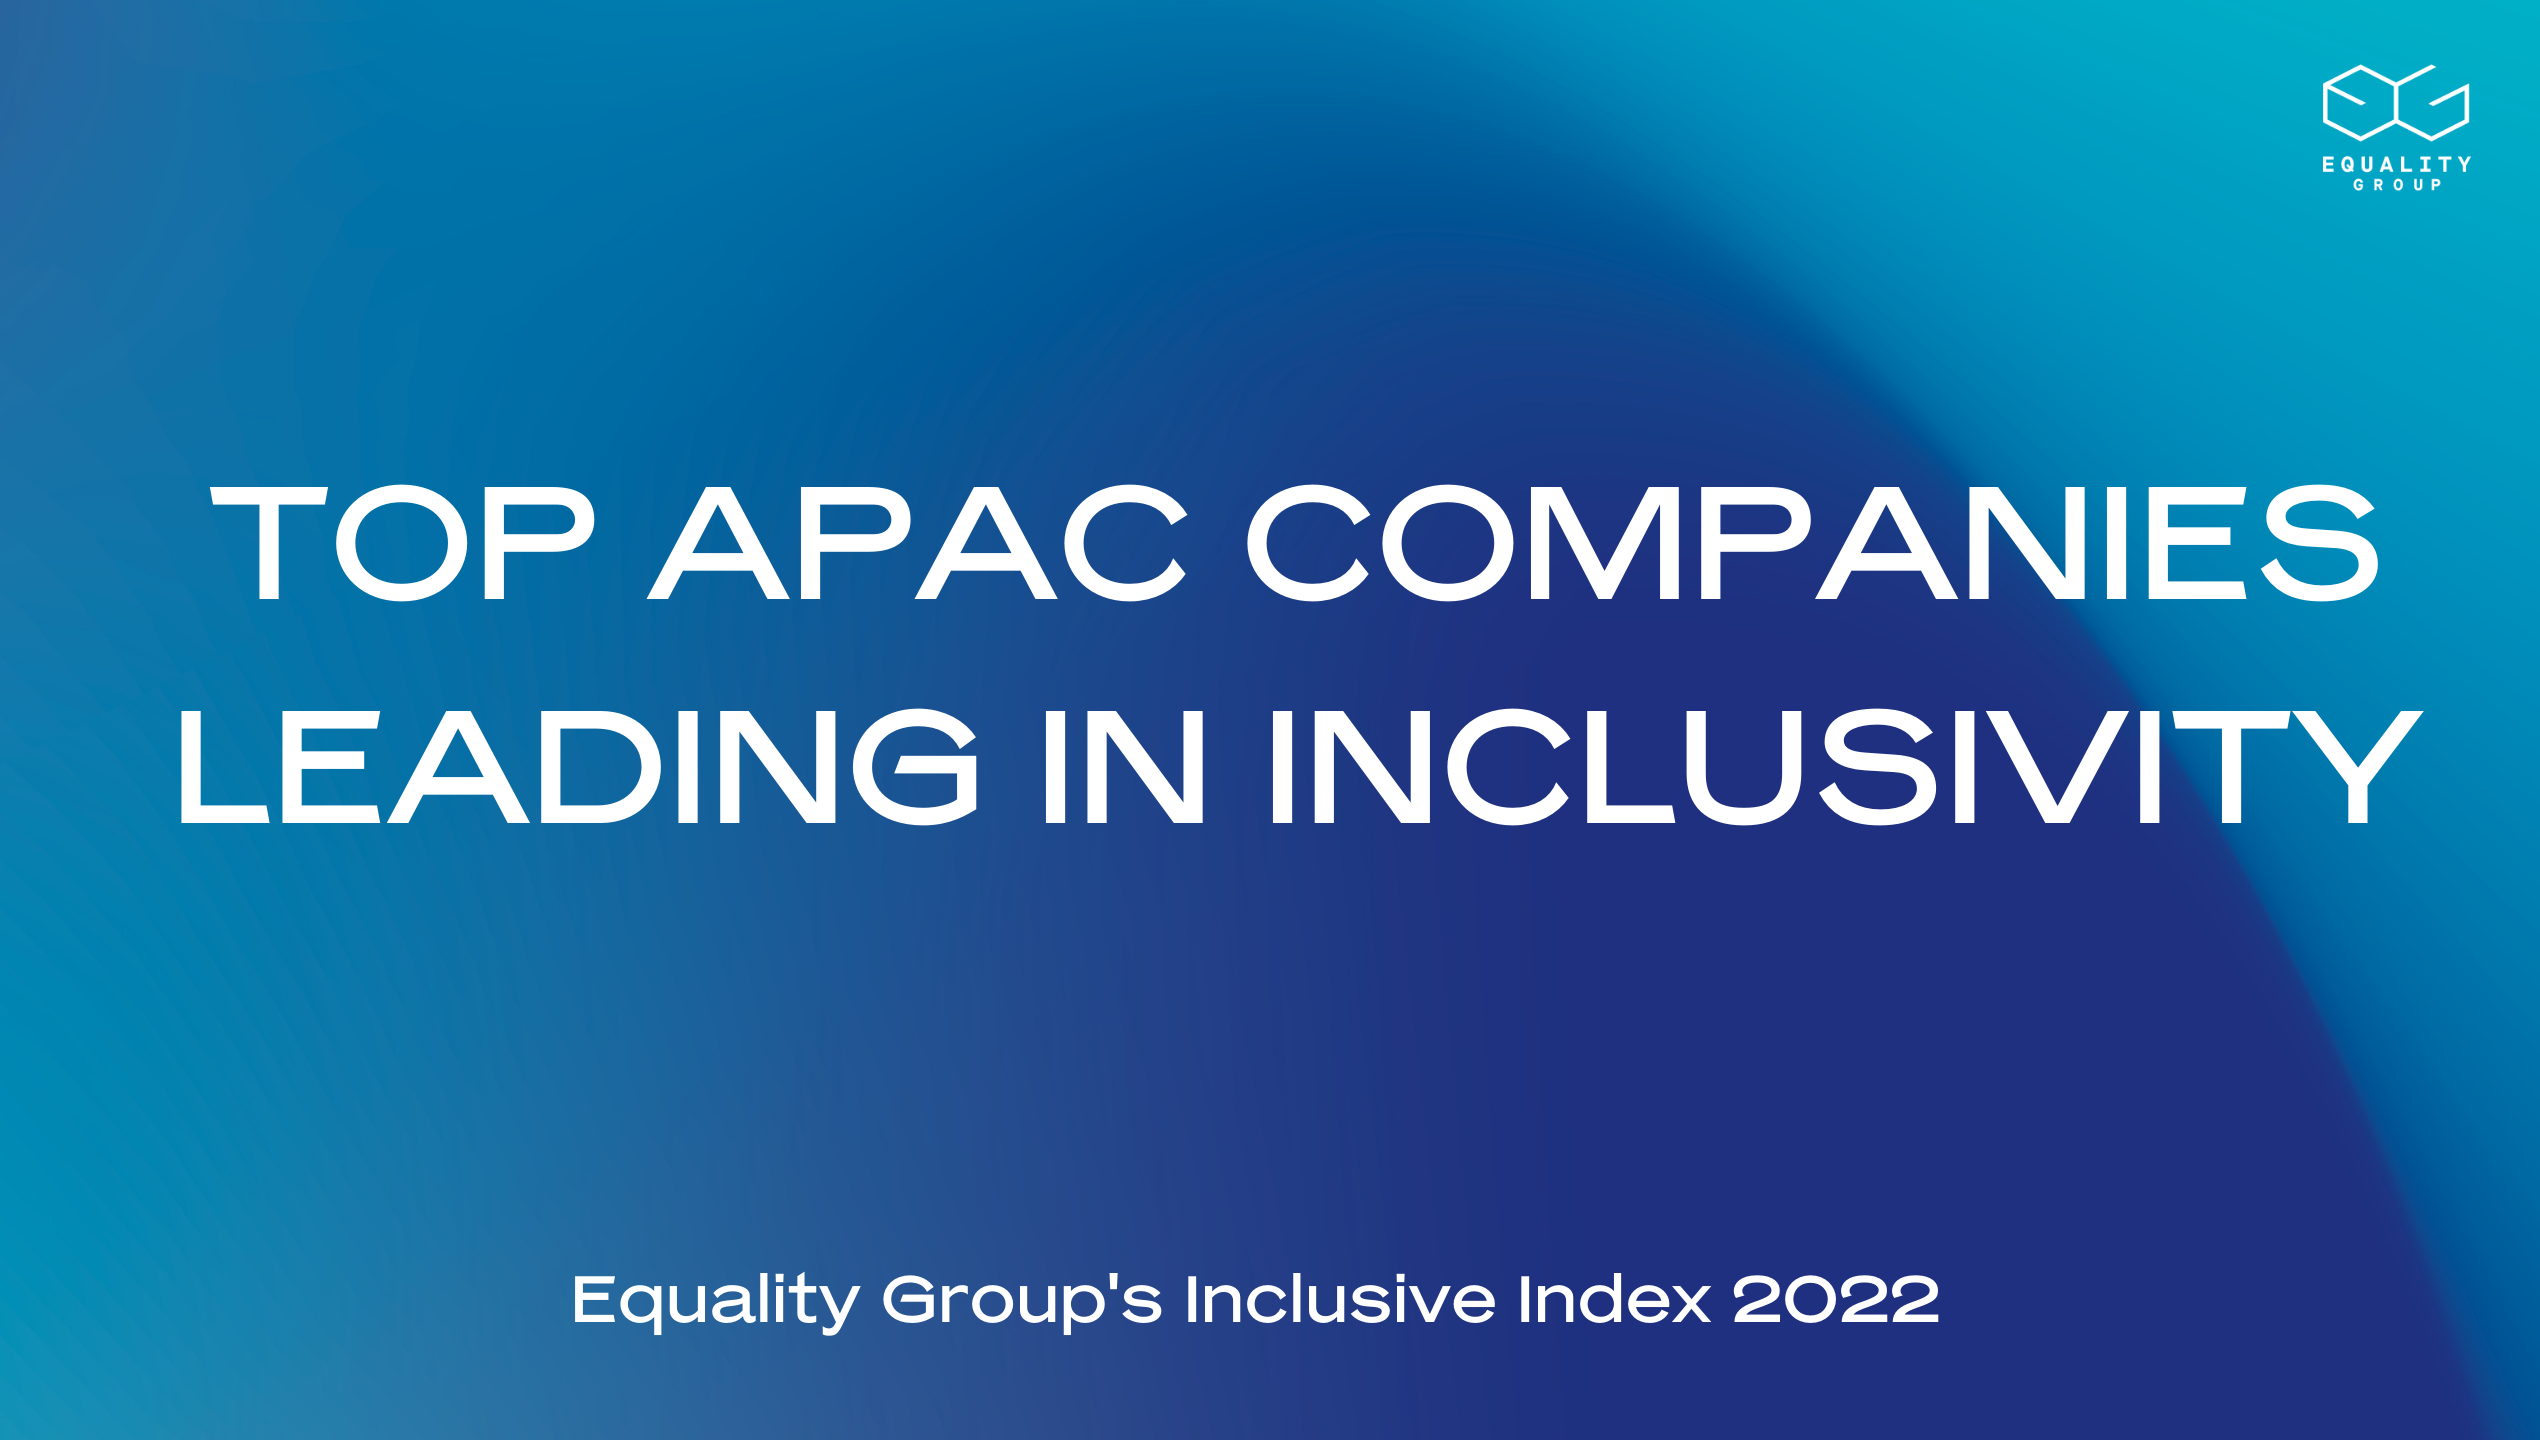 TOP APAC COMPANIES LEADING THE WAY IN INCLUSIVITY (3)